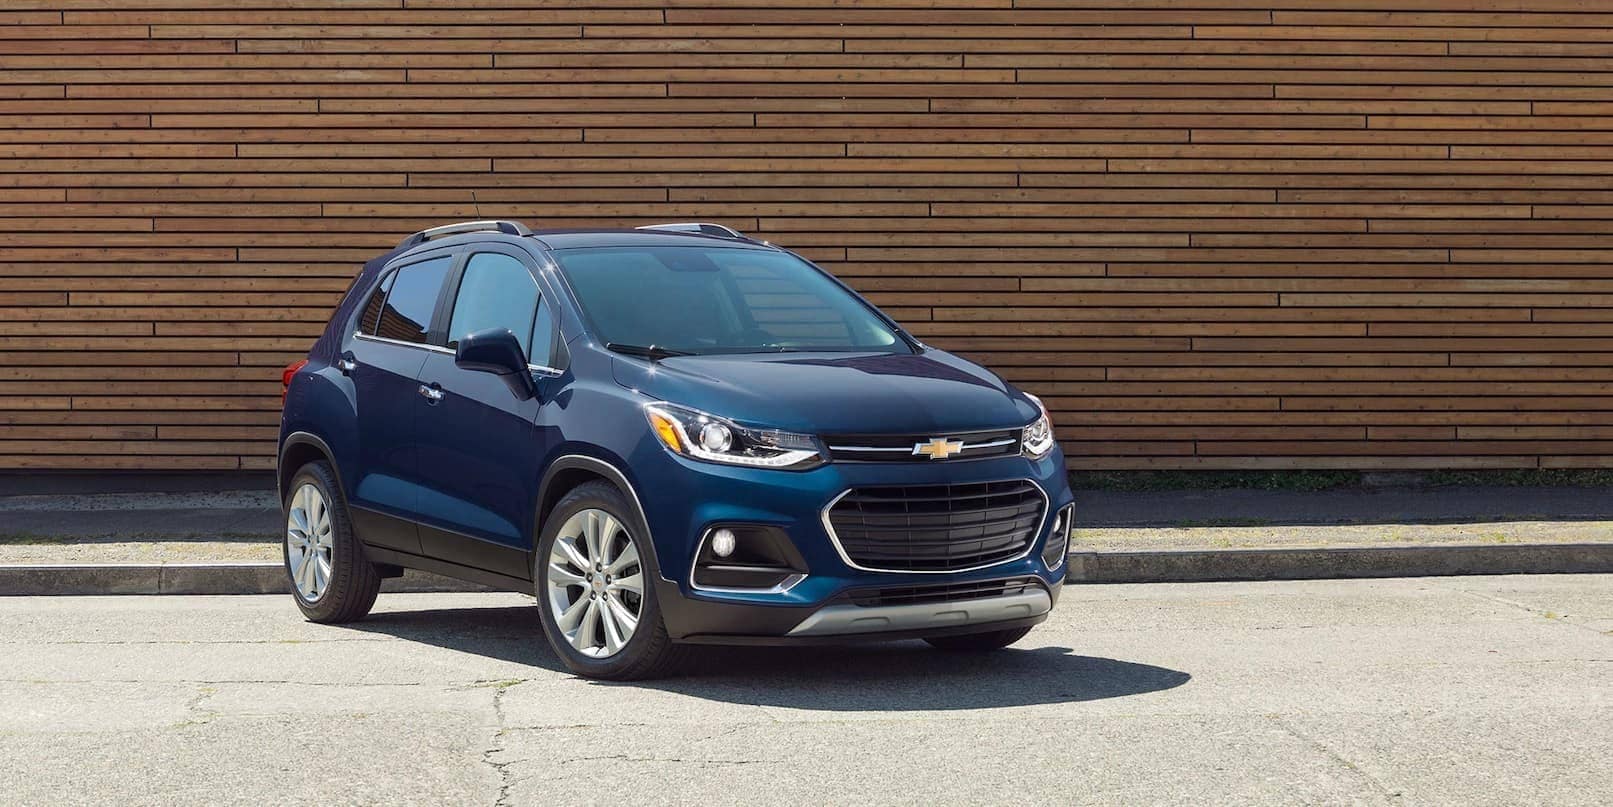 2019 Chevrolet Trax in blue parked